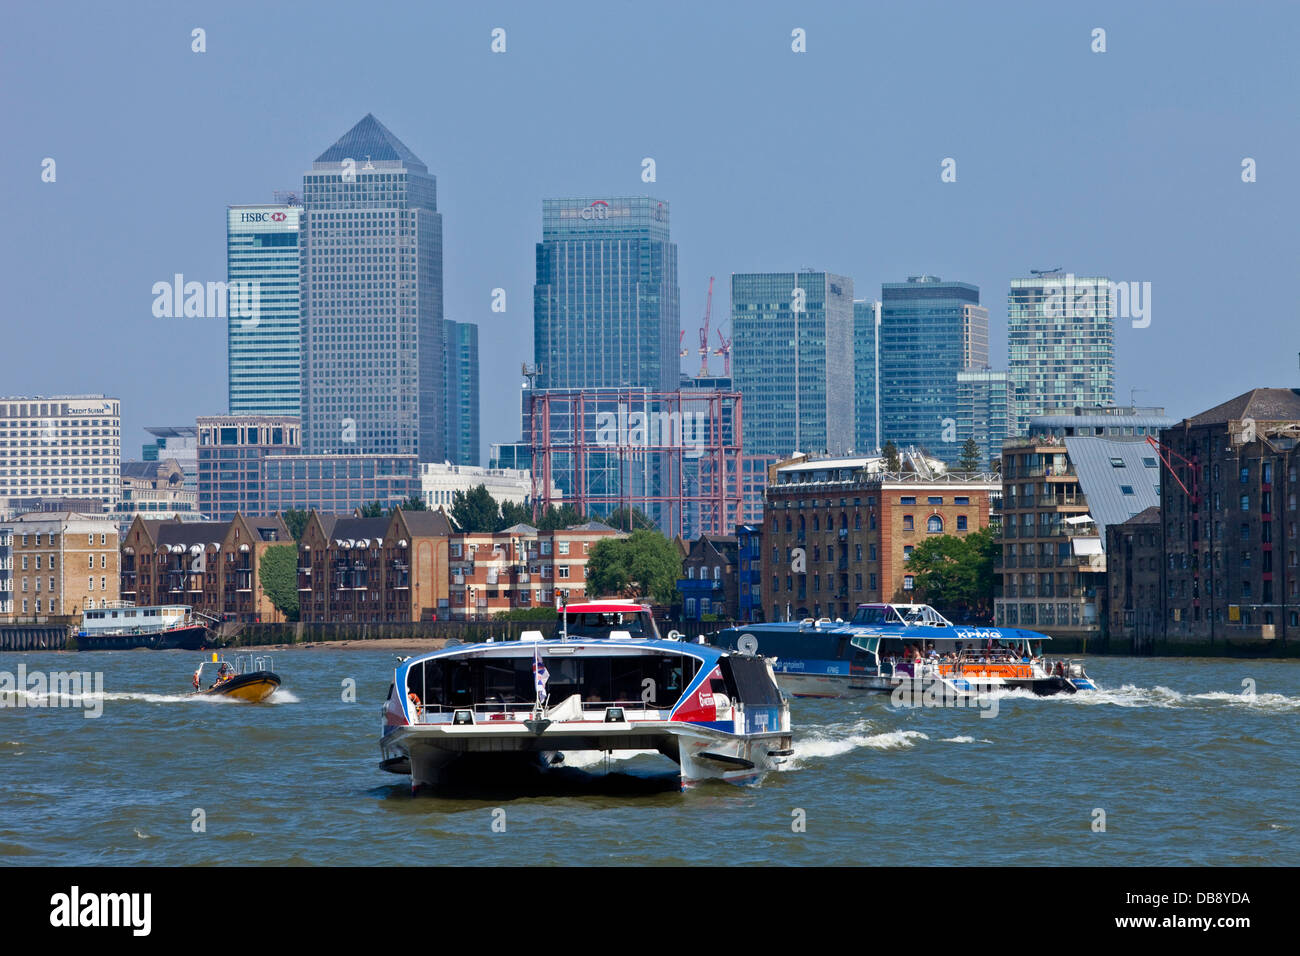 Thames Clipper River Bus and Canary Wharf, London, England Stock Photo